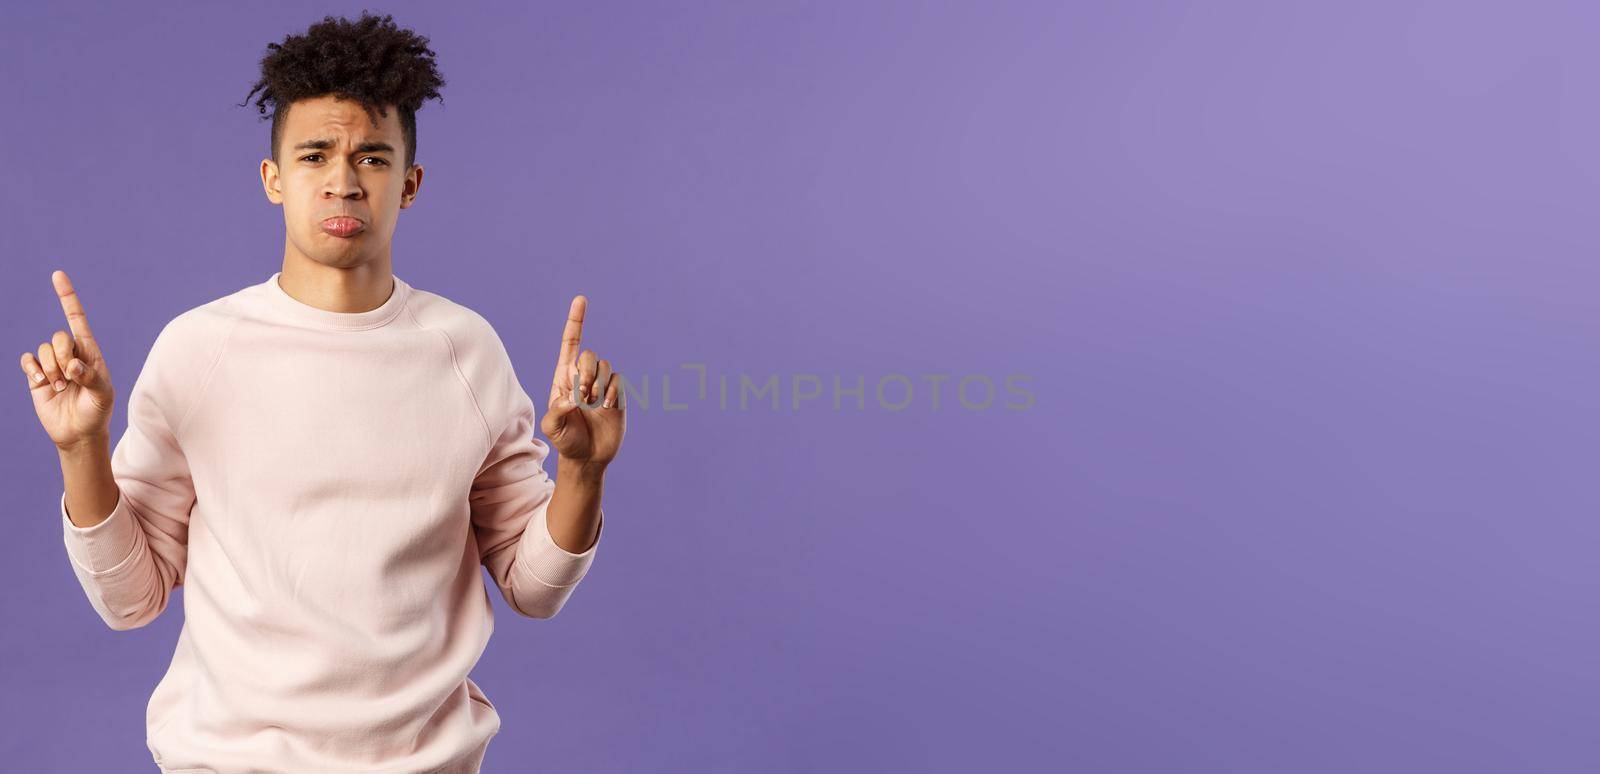 Portrait of gloomy, pouting frowning hipster guy dont have something he wants, pointing fingers up at super cool expensive thing, asking for it, trying receive compassion, purple background.